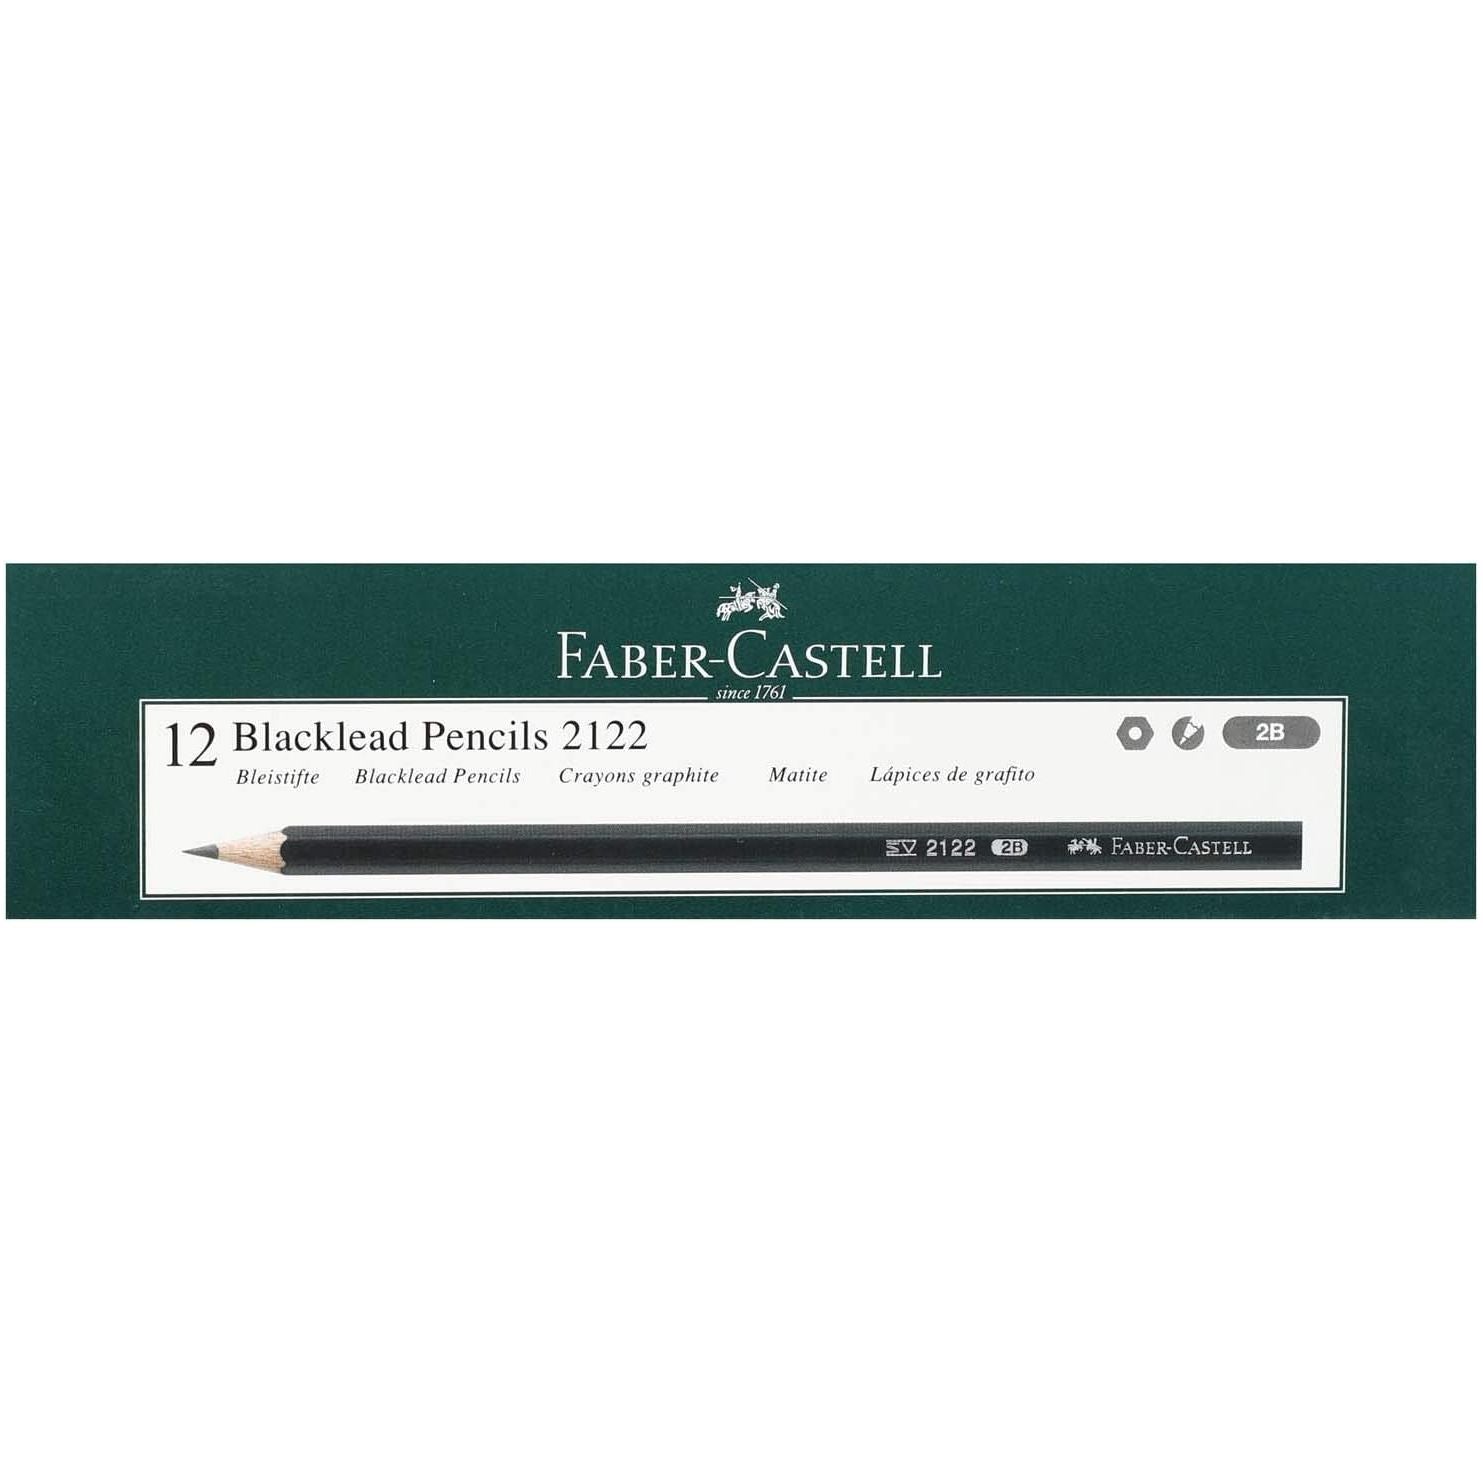 Faber-Castell Blacklead Pencils 2B Tip 2122 (Pack of 12)